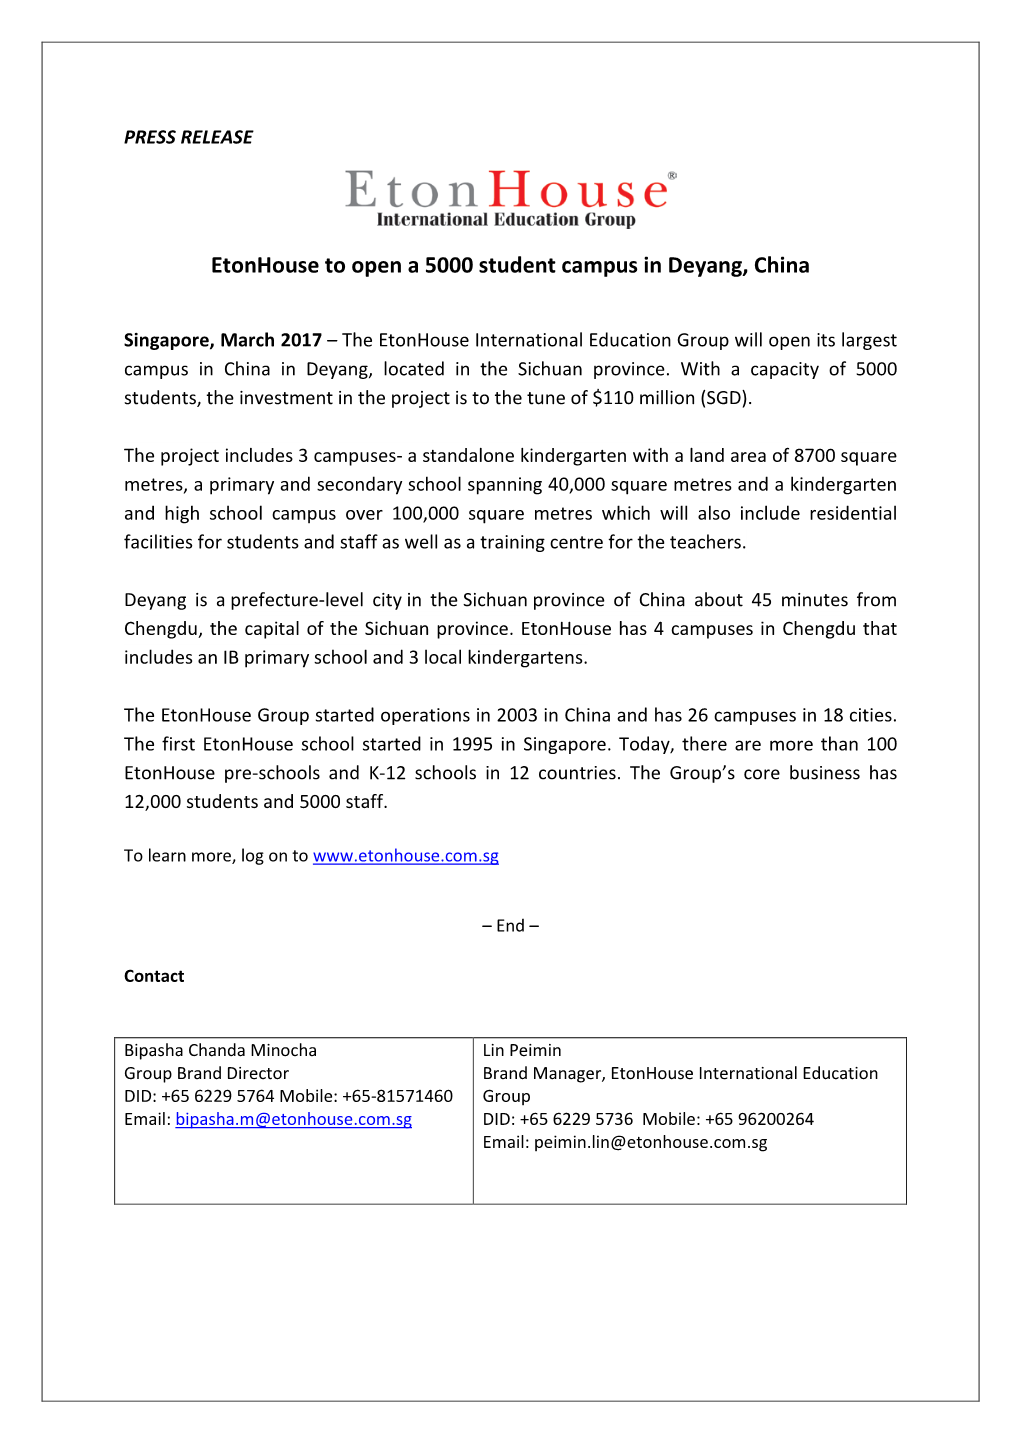 Etonhouse to Open a 5000 Student Campus in Deyang, China